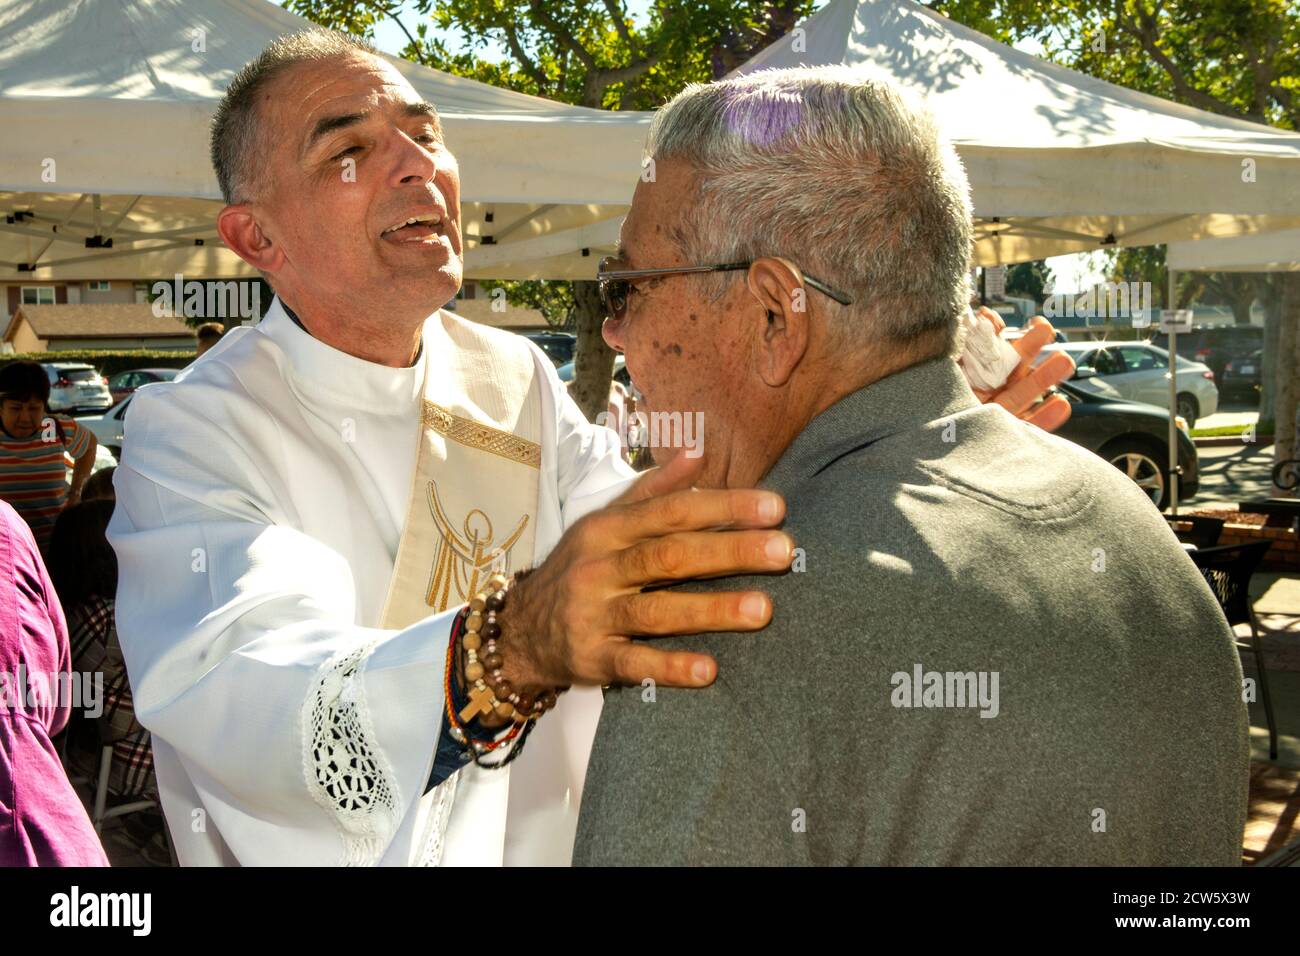 After mass, the deacon of a Southern California Catholic church embraces a parishioner in the church outdoor yard. Stock Photo